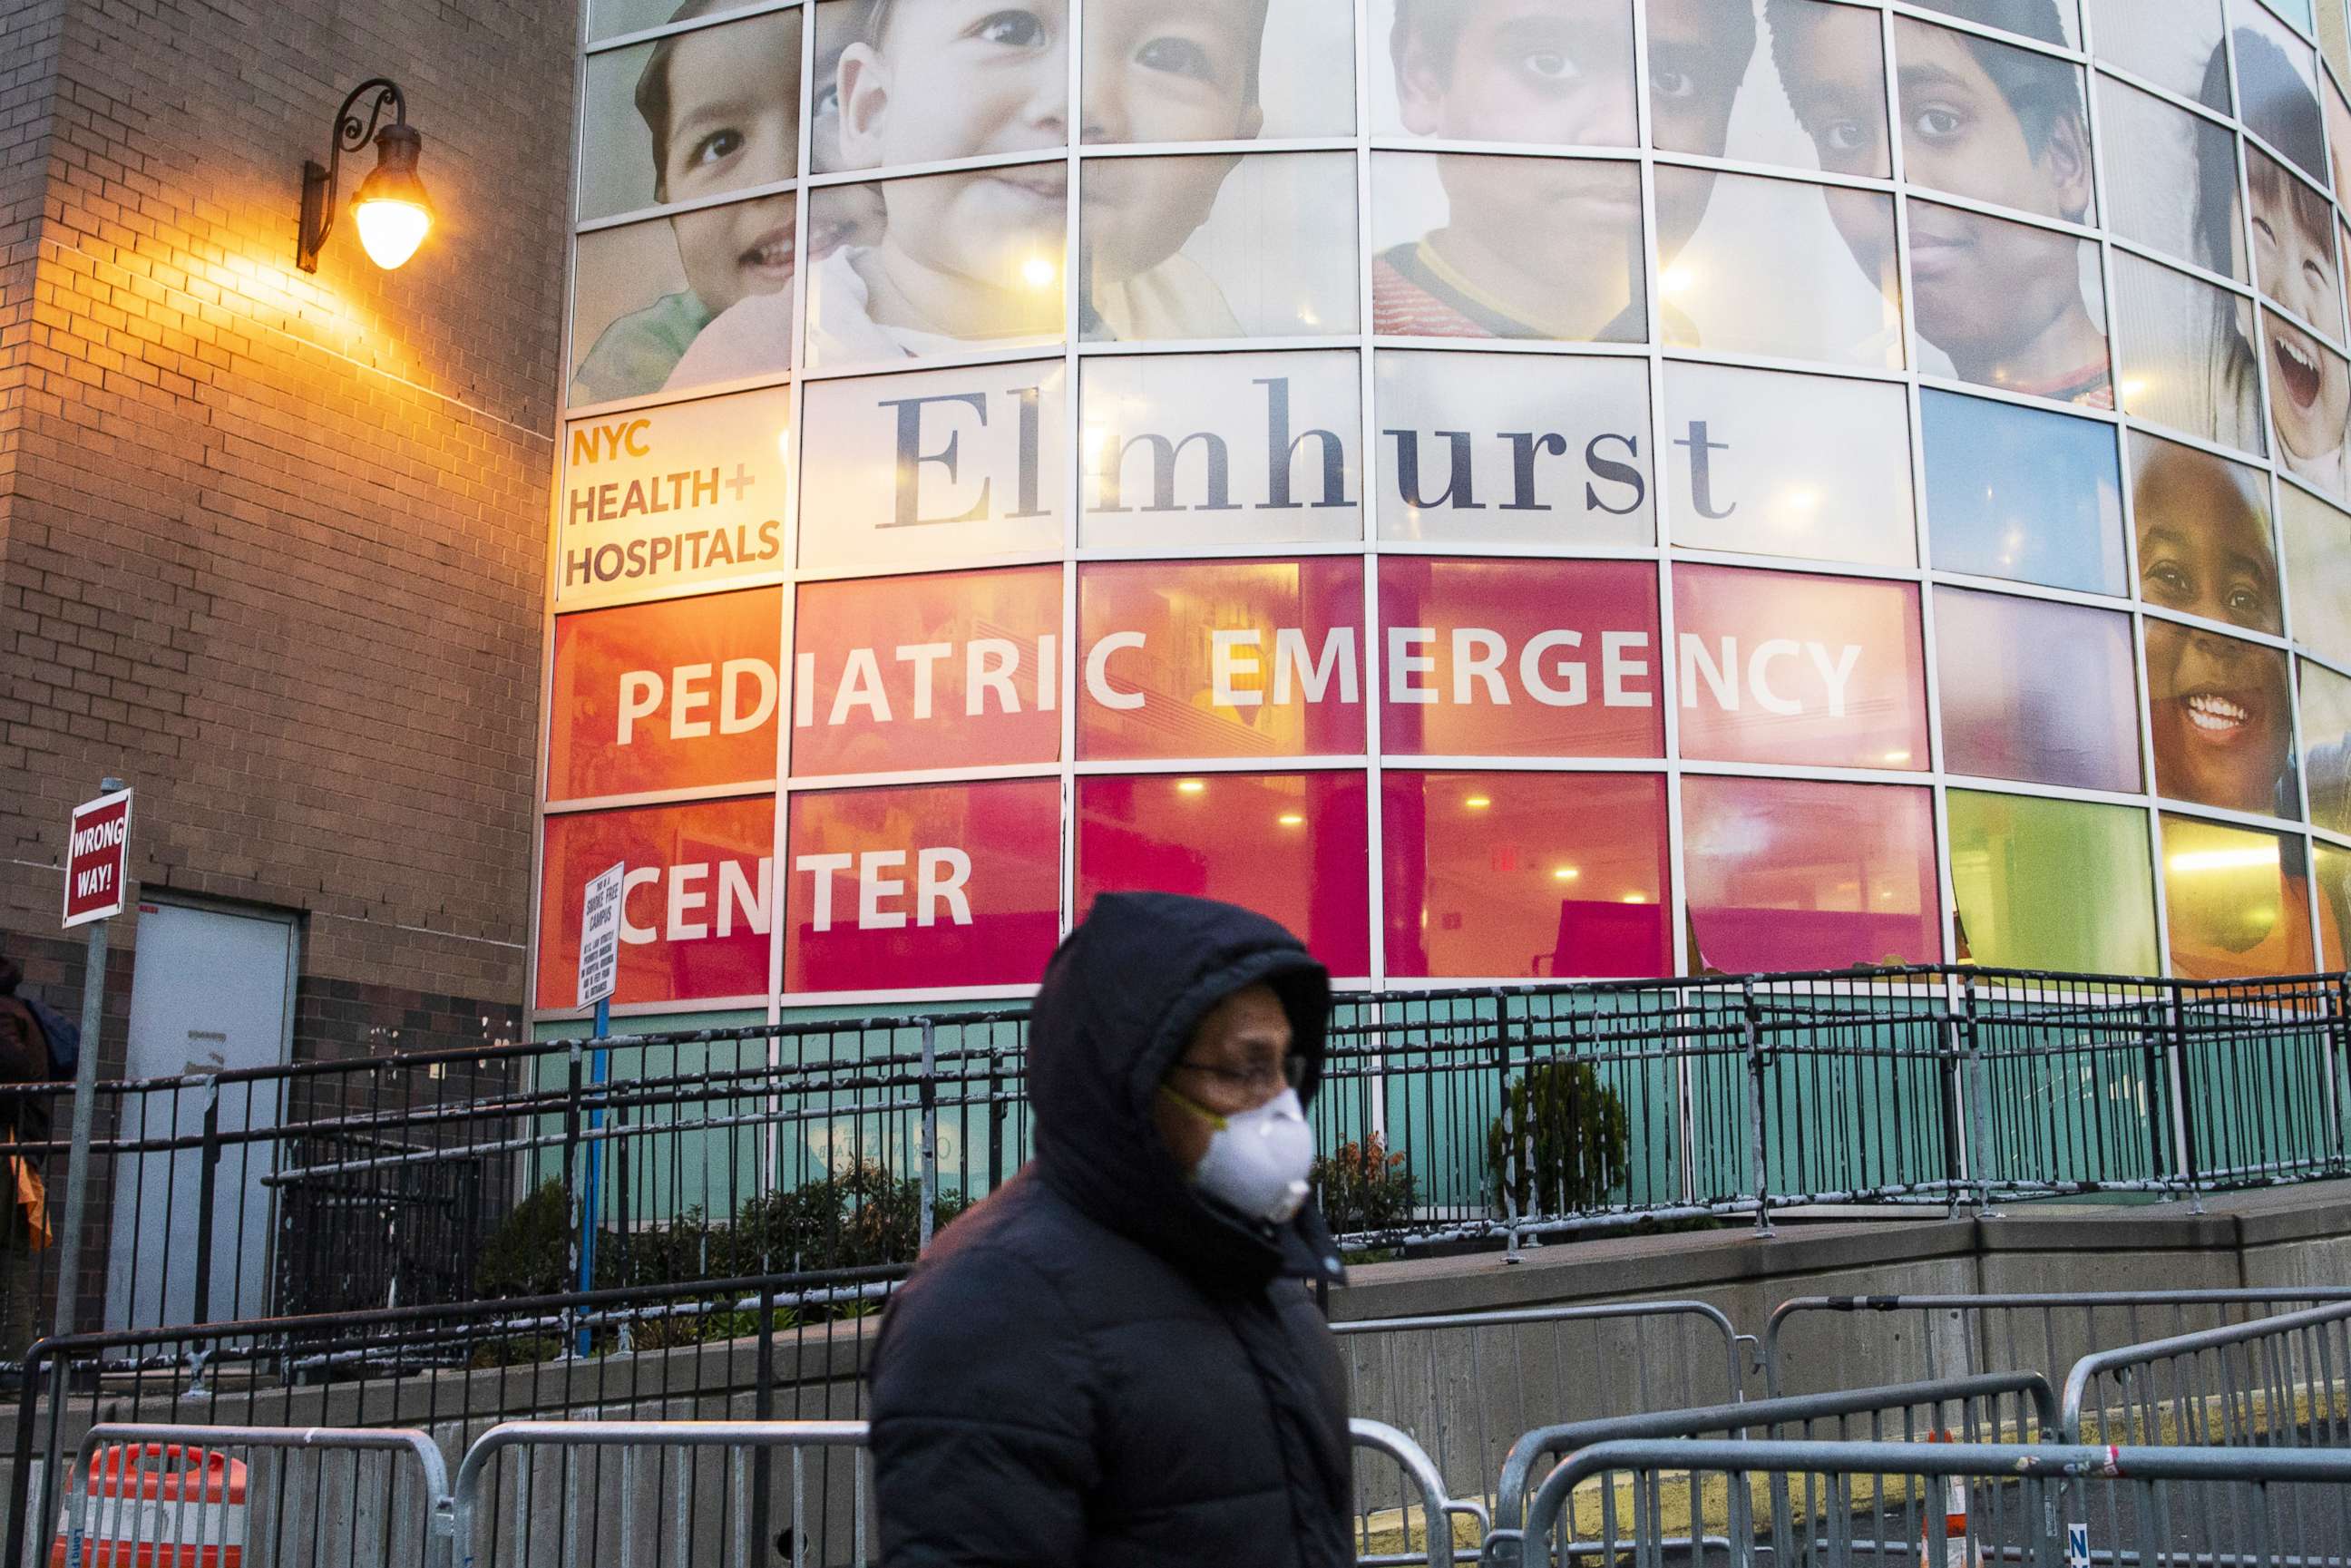 PHOTO: A man arrives for a test at Elmhurst Hospital due to coronavirus outbreak on March 23, 2020 in Queens, New York.